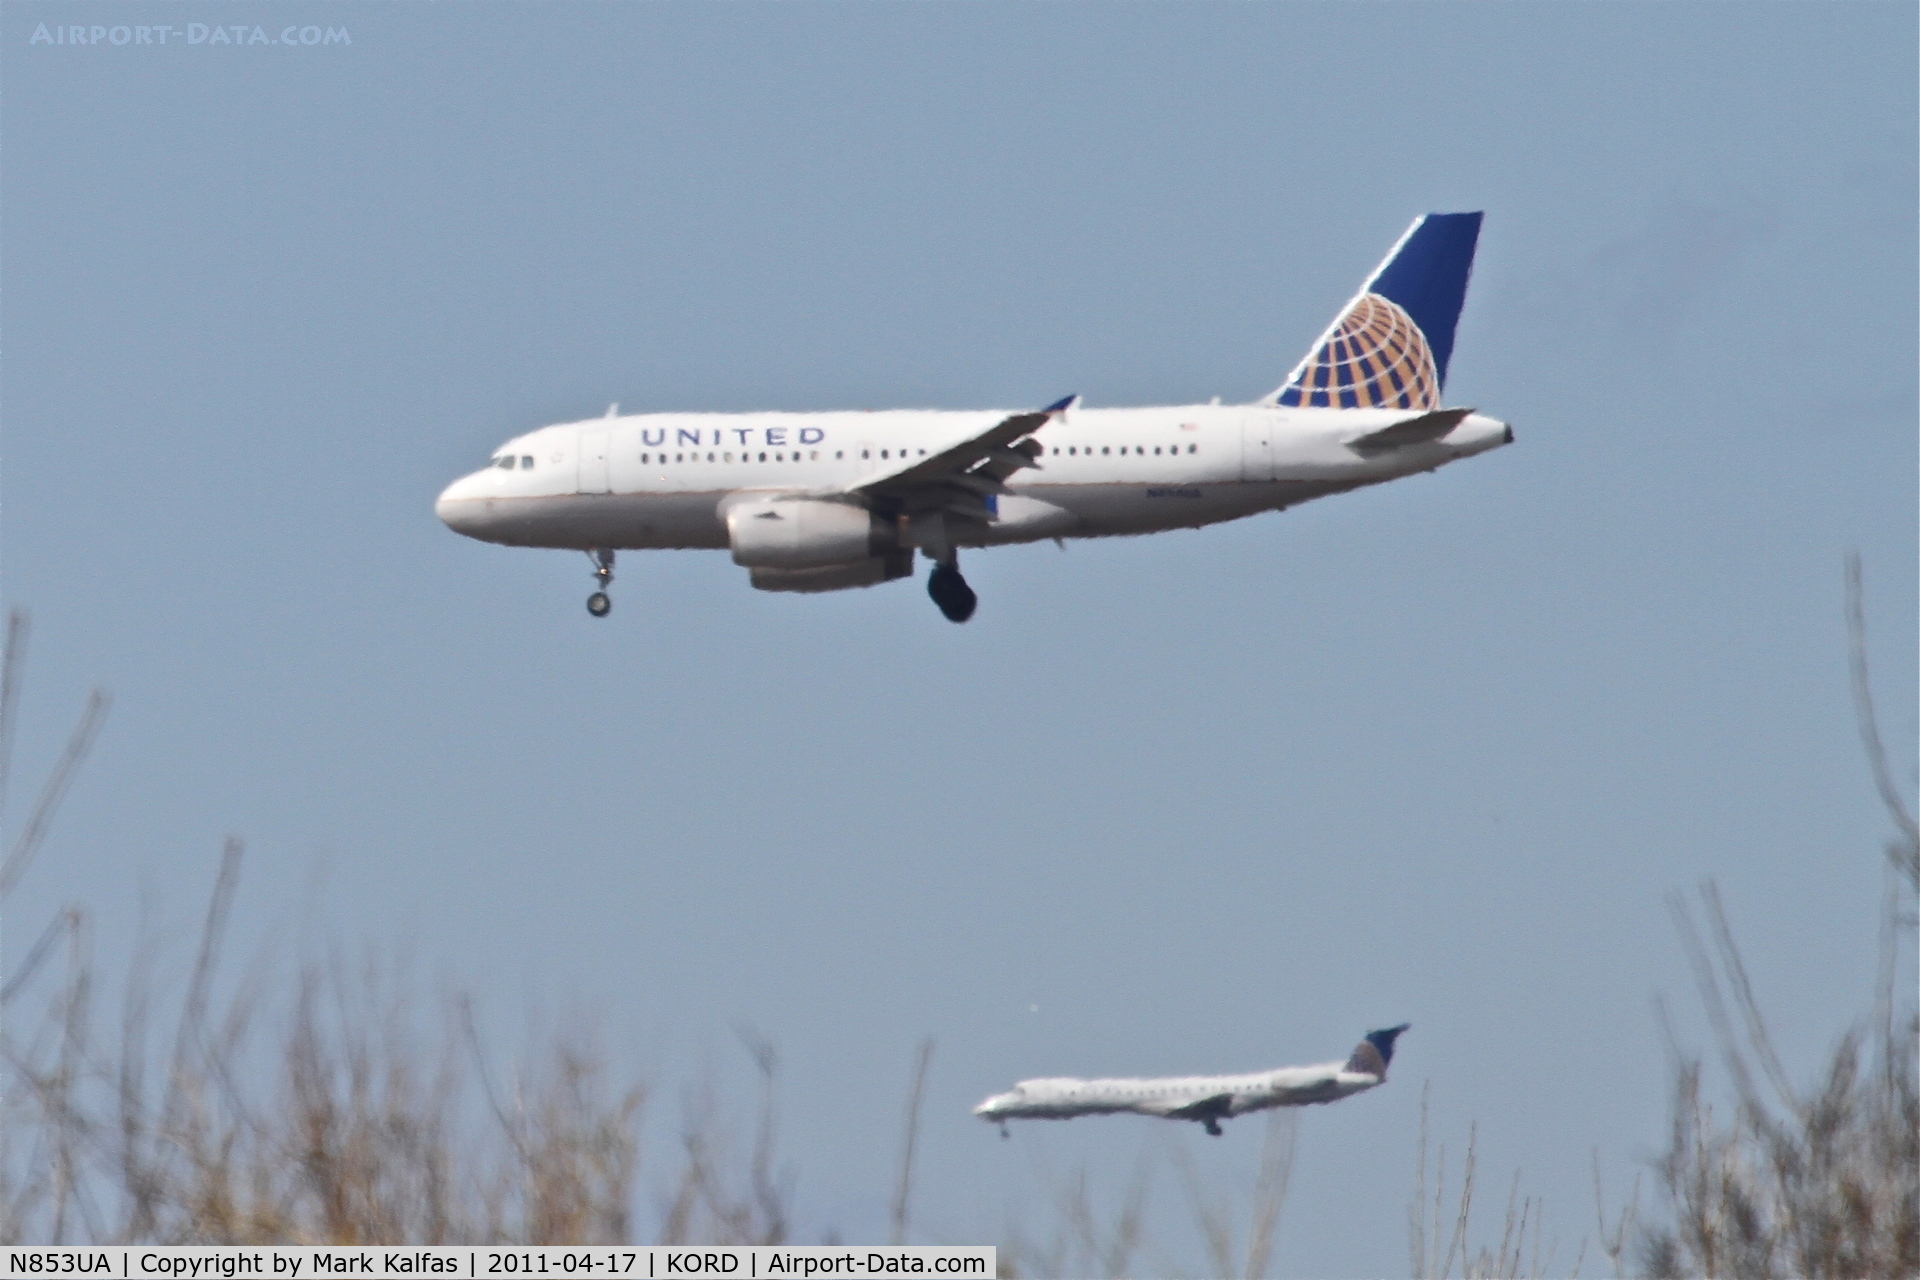 N853UA, 2002 Airbus A319-131 C/N 1688, United Airlines Airbus A319-131, UAL672 arriving fro KBWI, RWY 27L KORD.